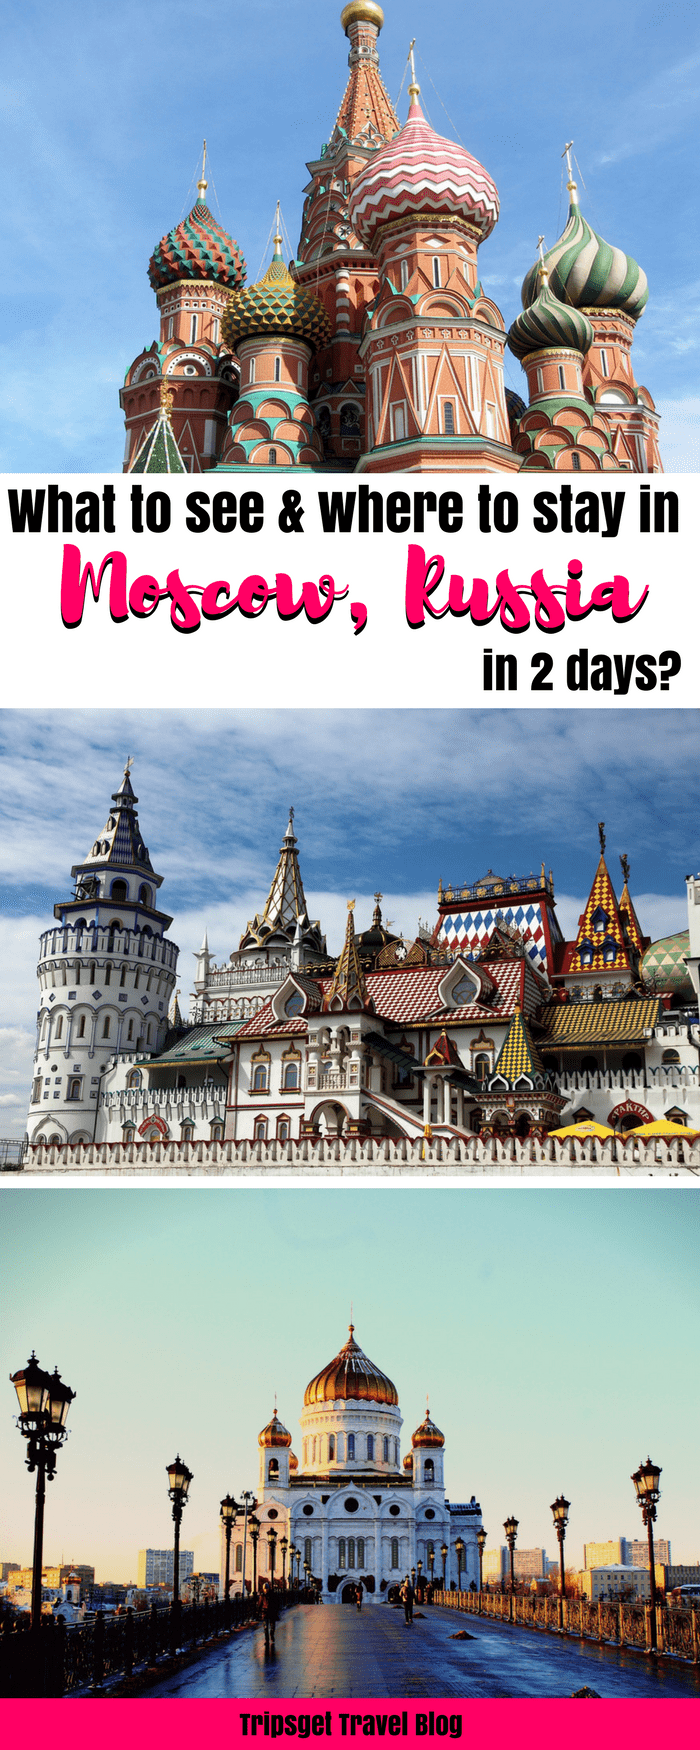 What to see in Moscow Russia in 2 days